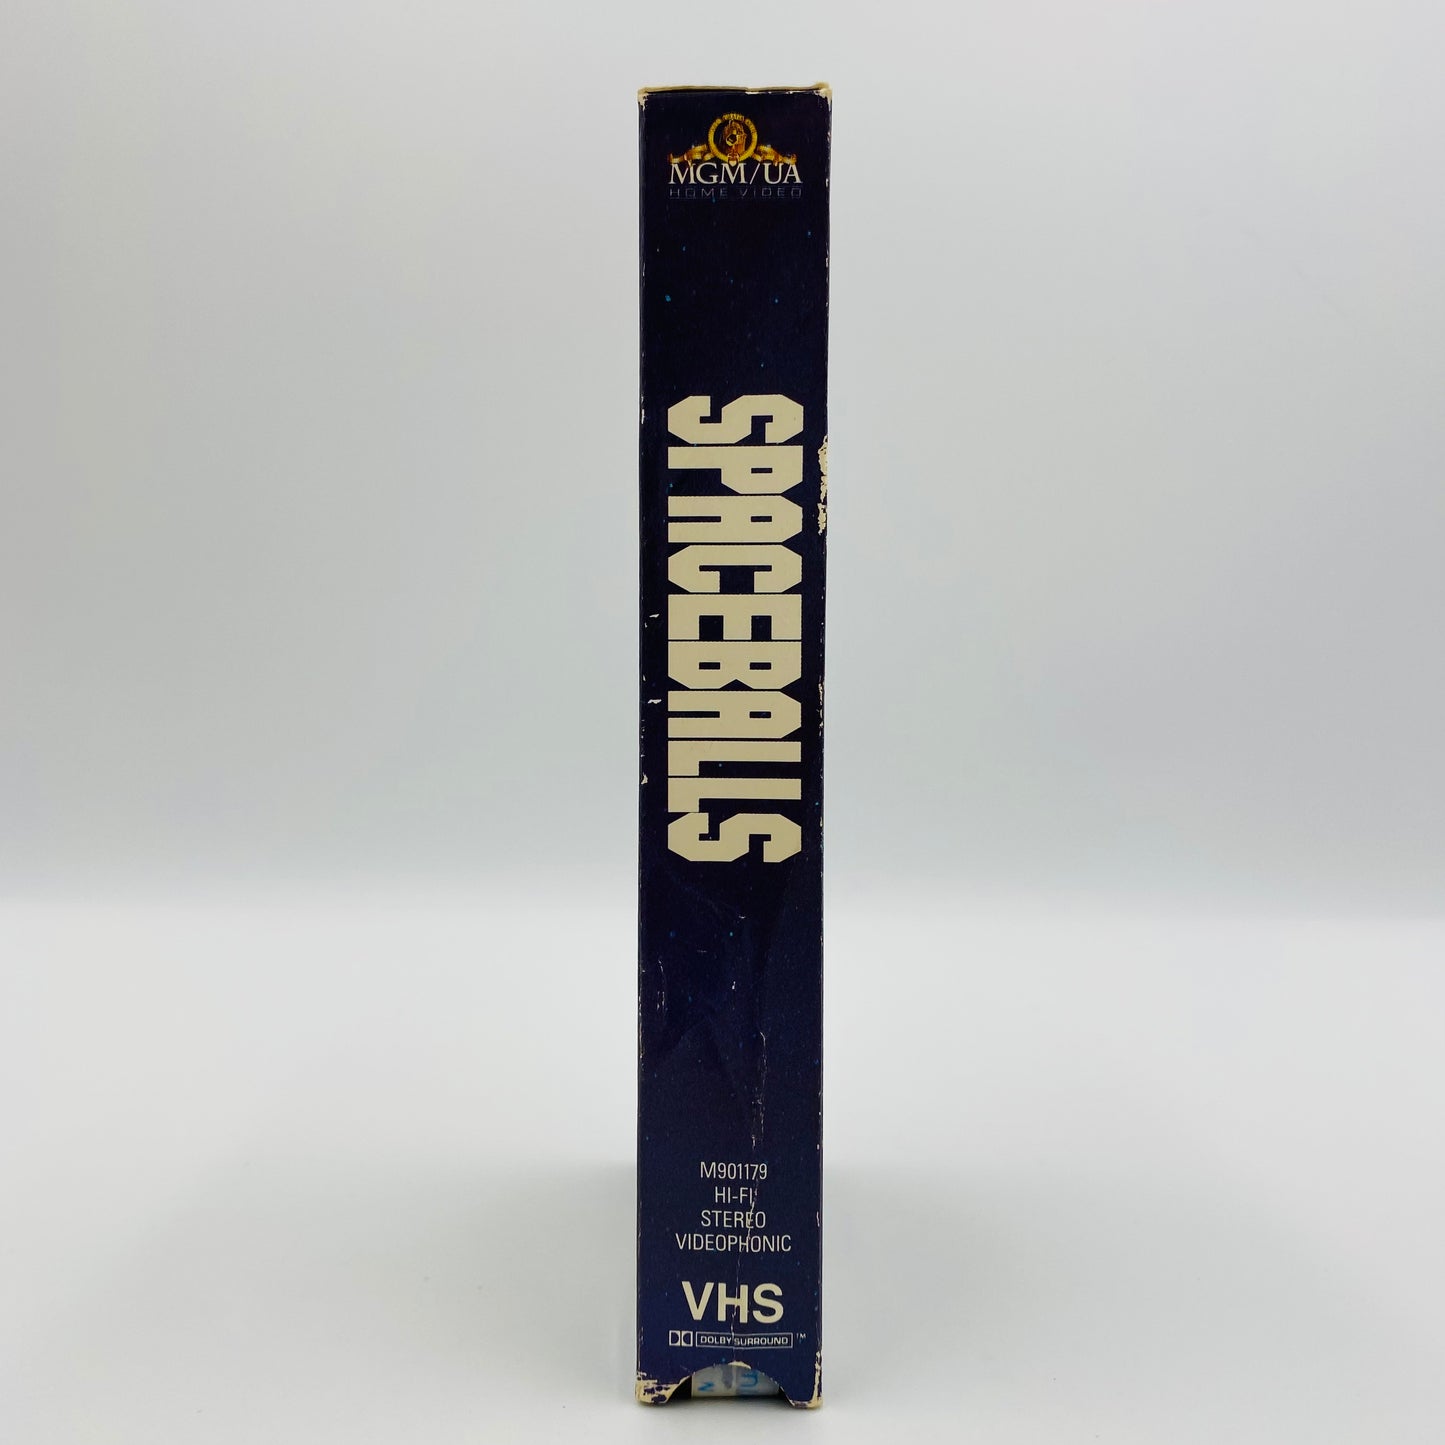 Spaceballs The Video VHS tape (1988) MGM/UA Home Video